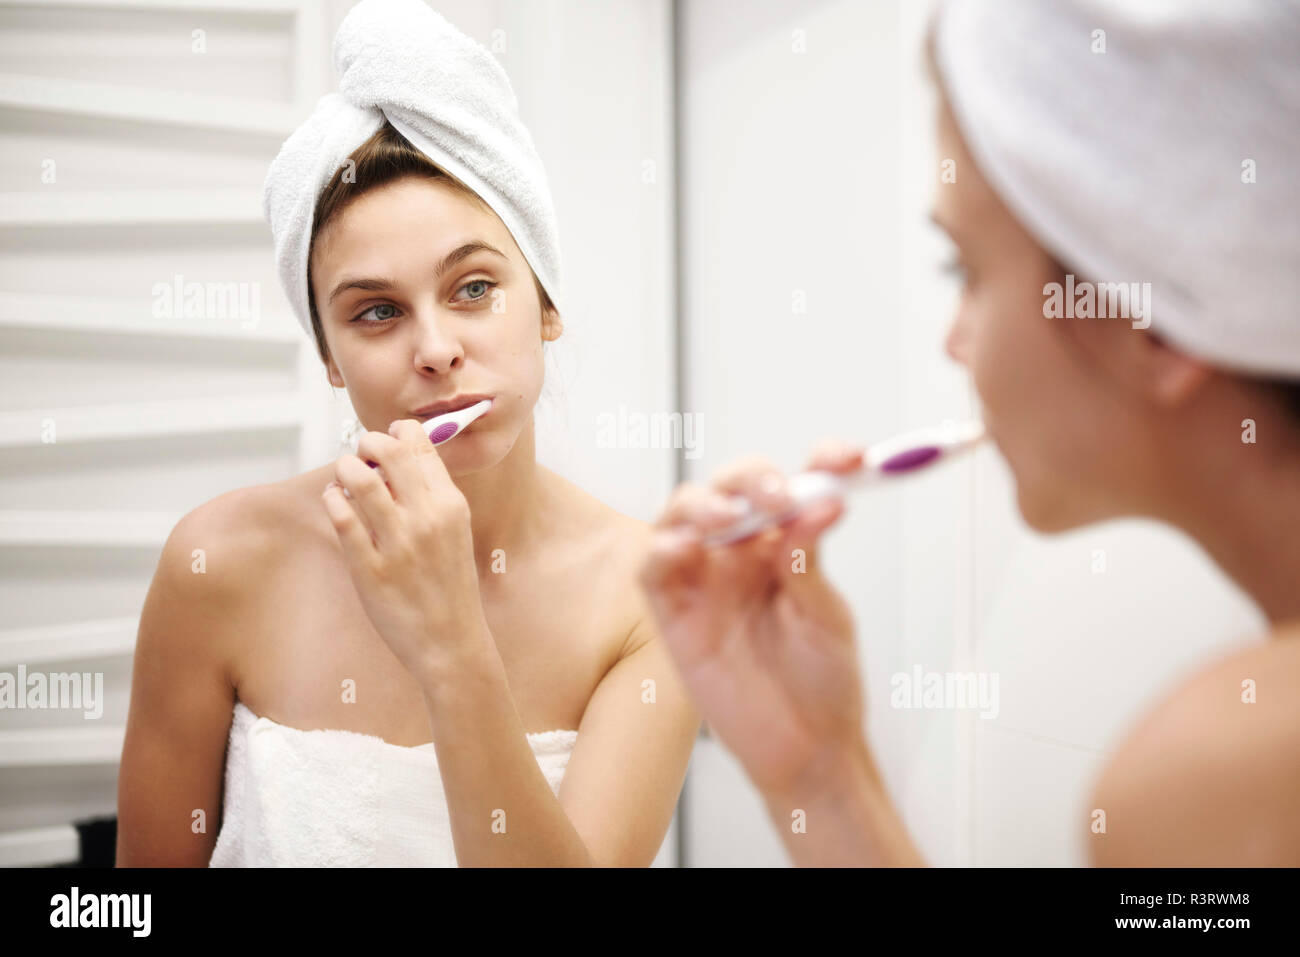 Mirror image of young woman in bathroom brushing her teeth Stock Photo